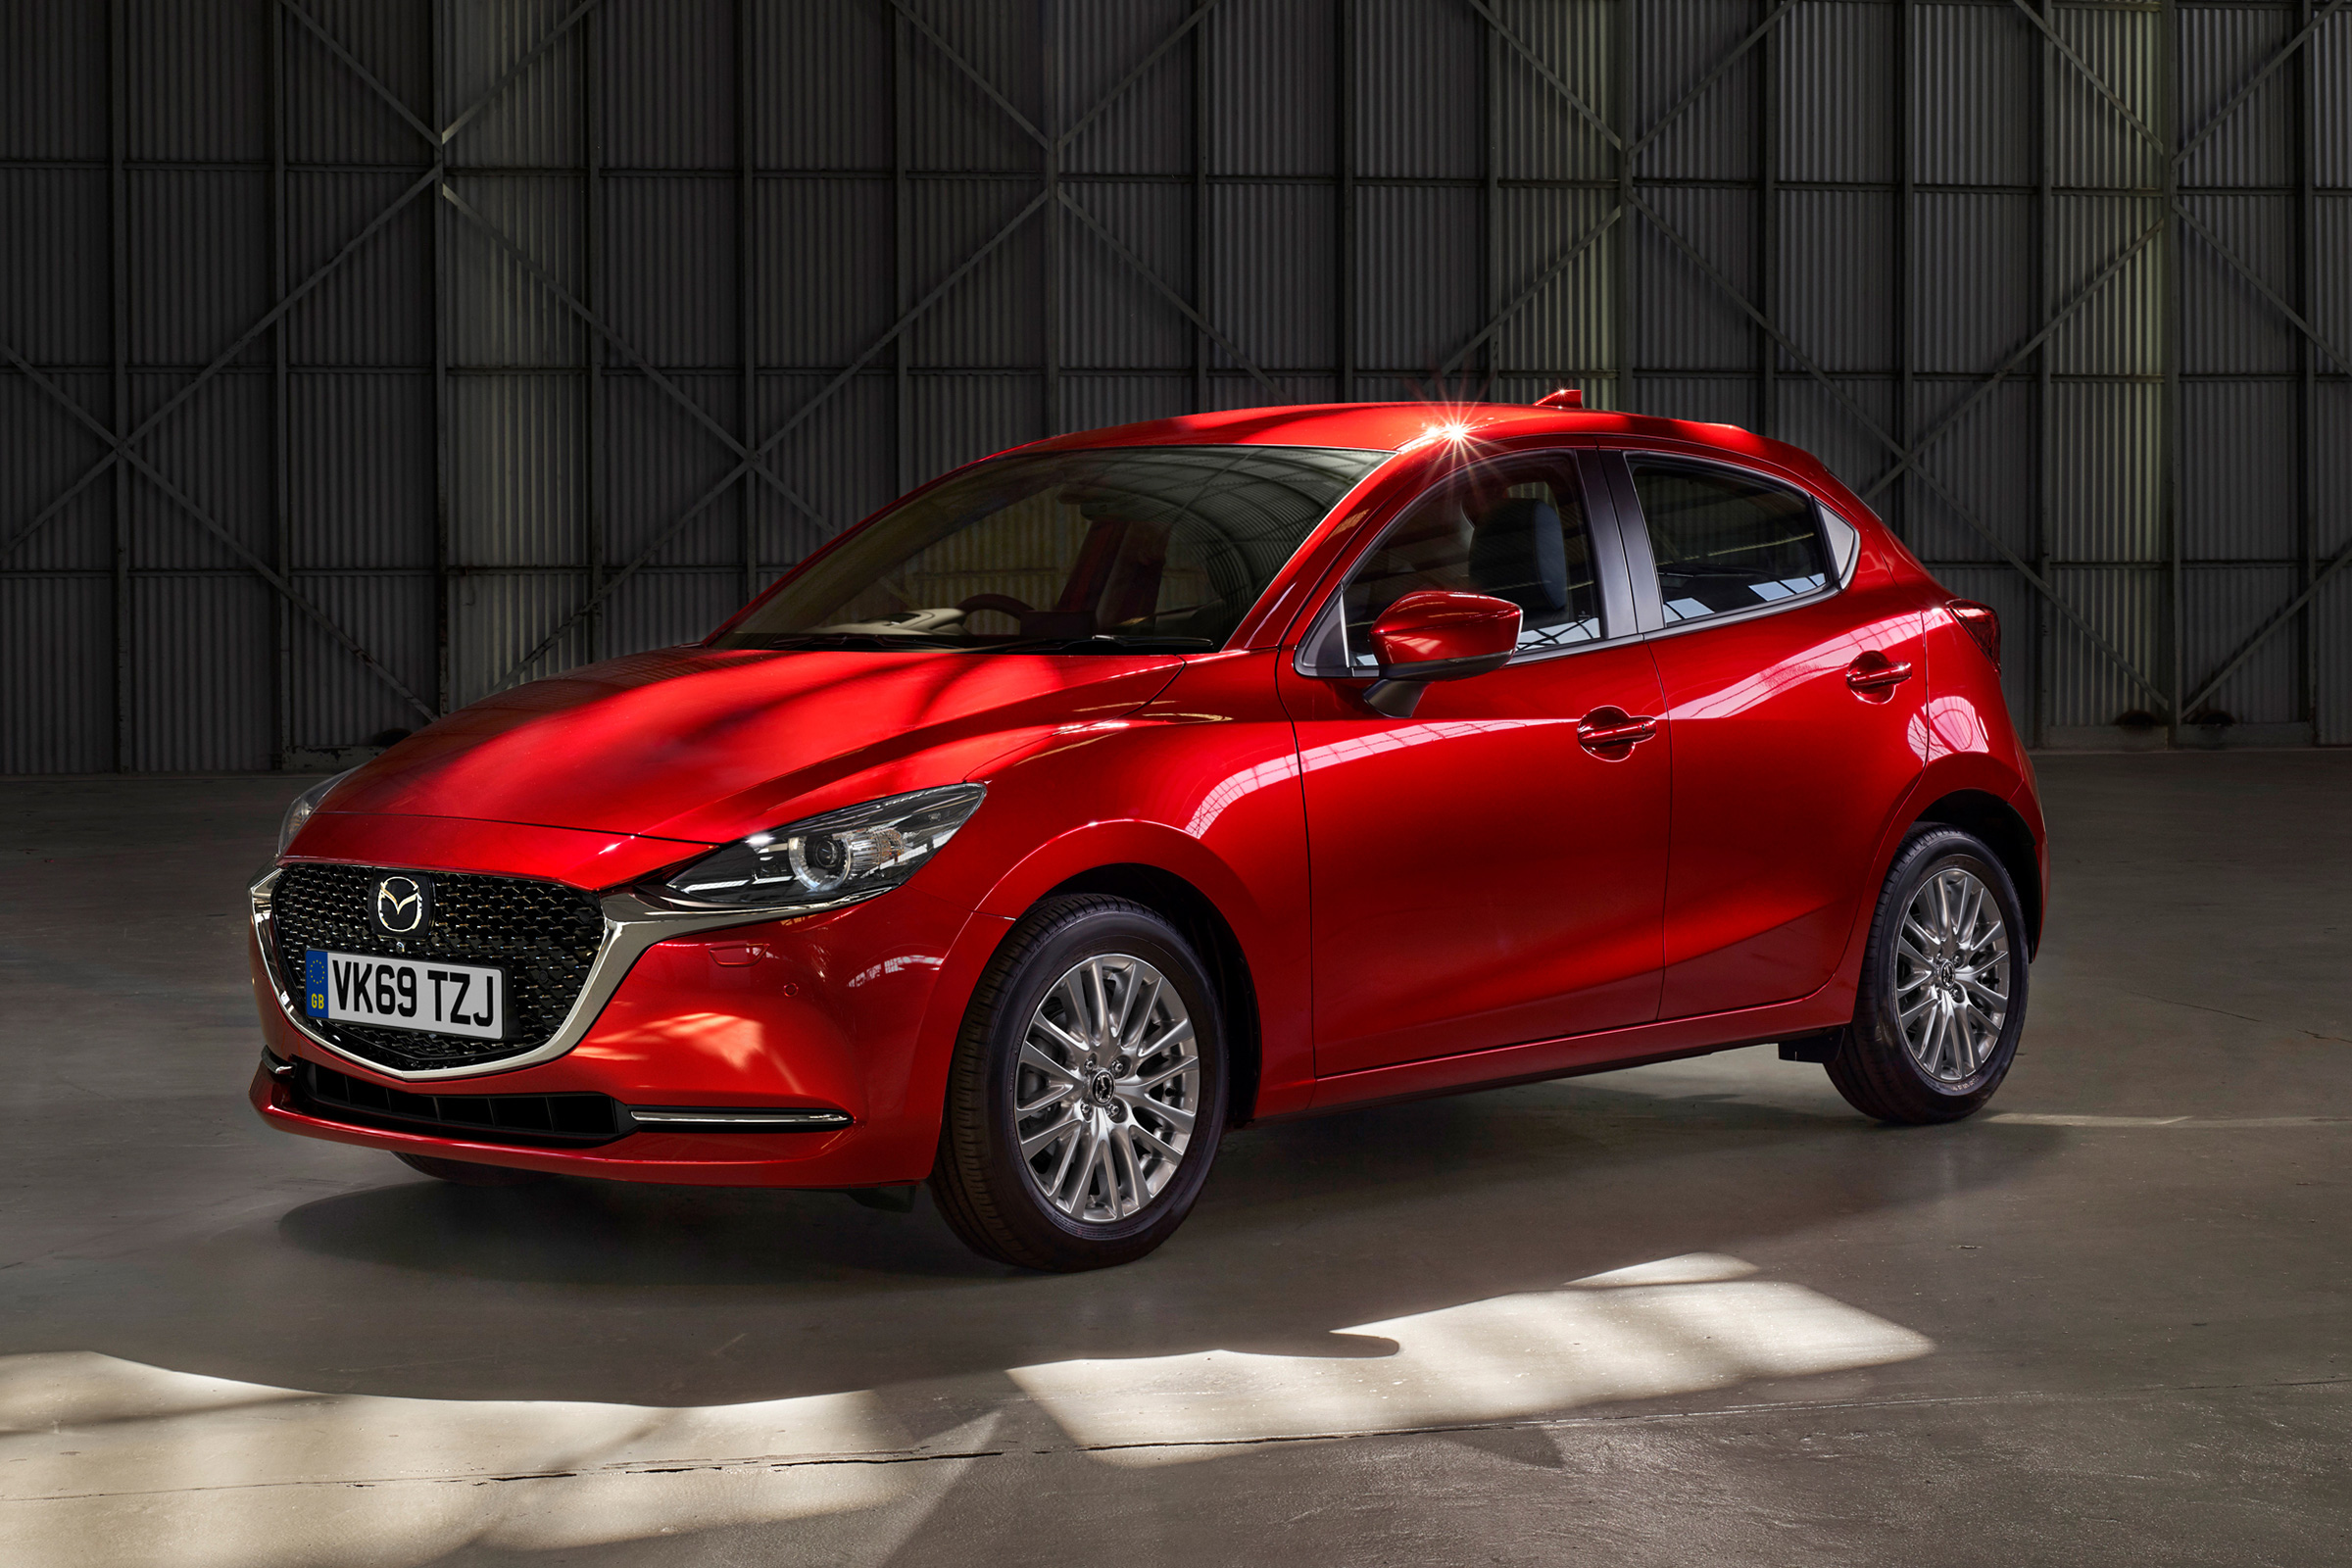 New 2020 Mazda 2: UK prices and specs revealed | Auto Express